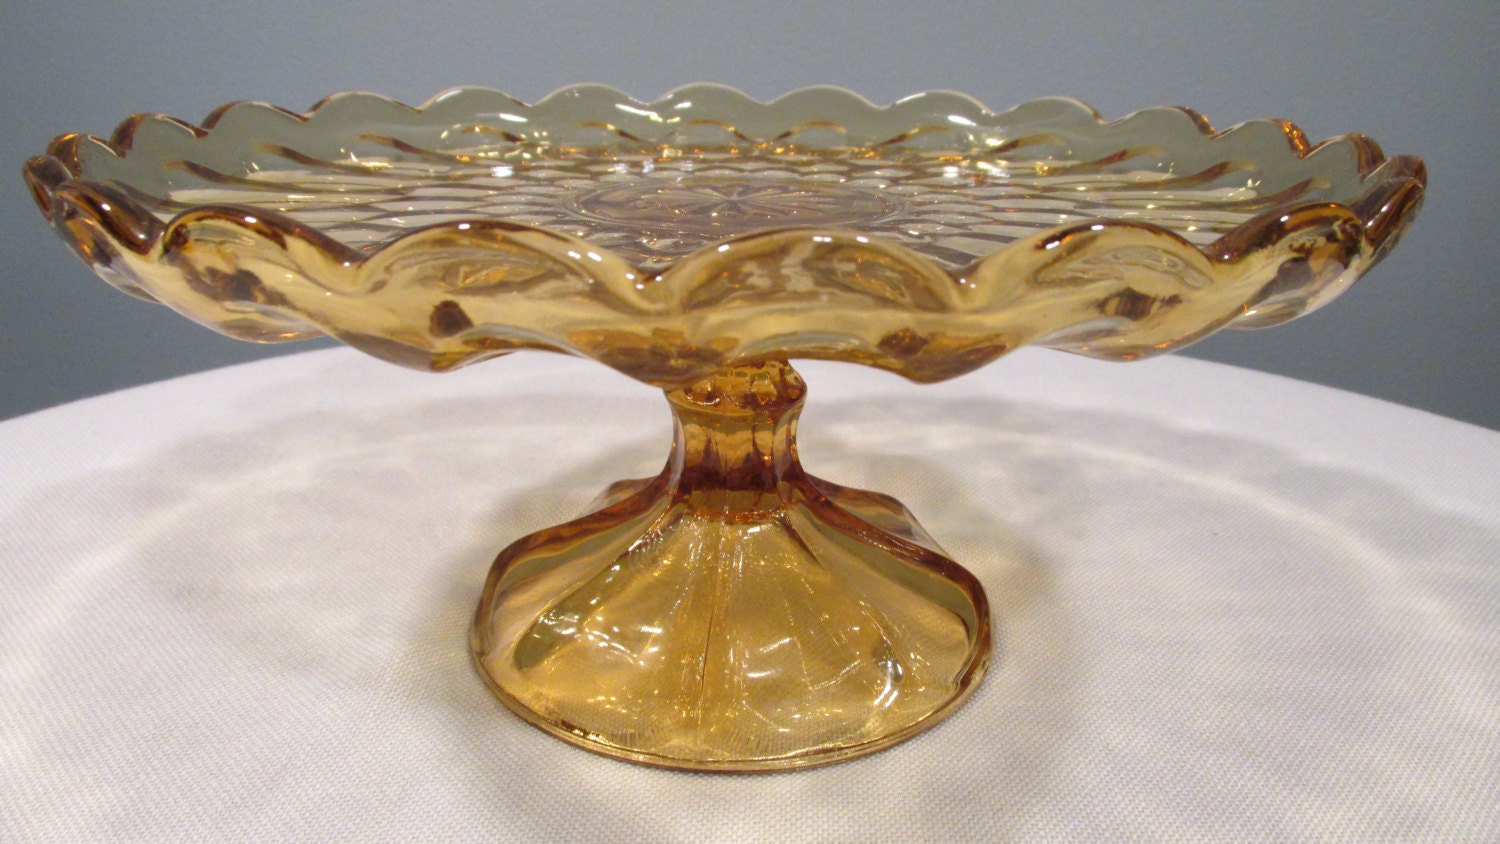 Vintage Amber Glass 1 footed Cake Plate made by Anchor Hocking for Fairfield - GoodBadandLovely